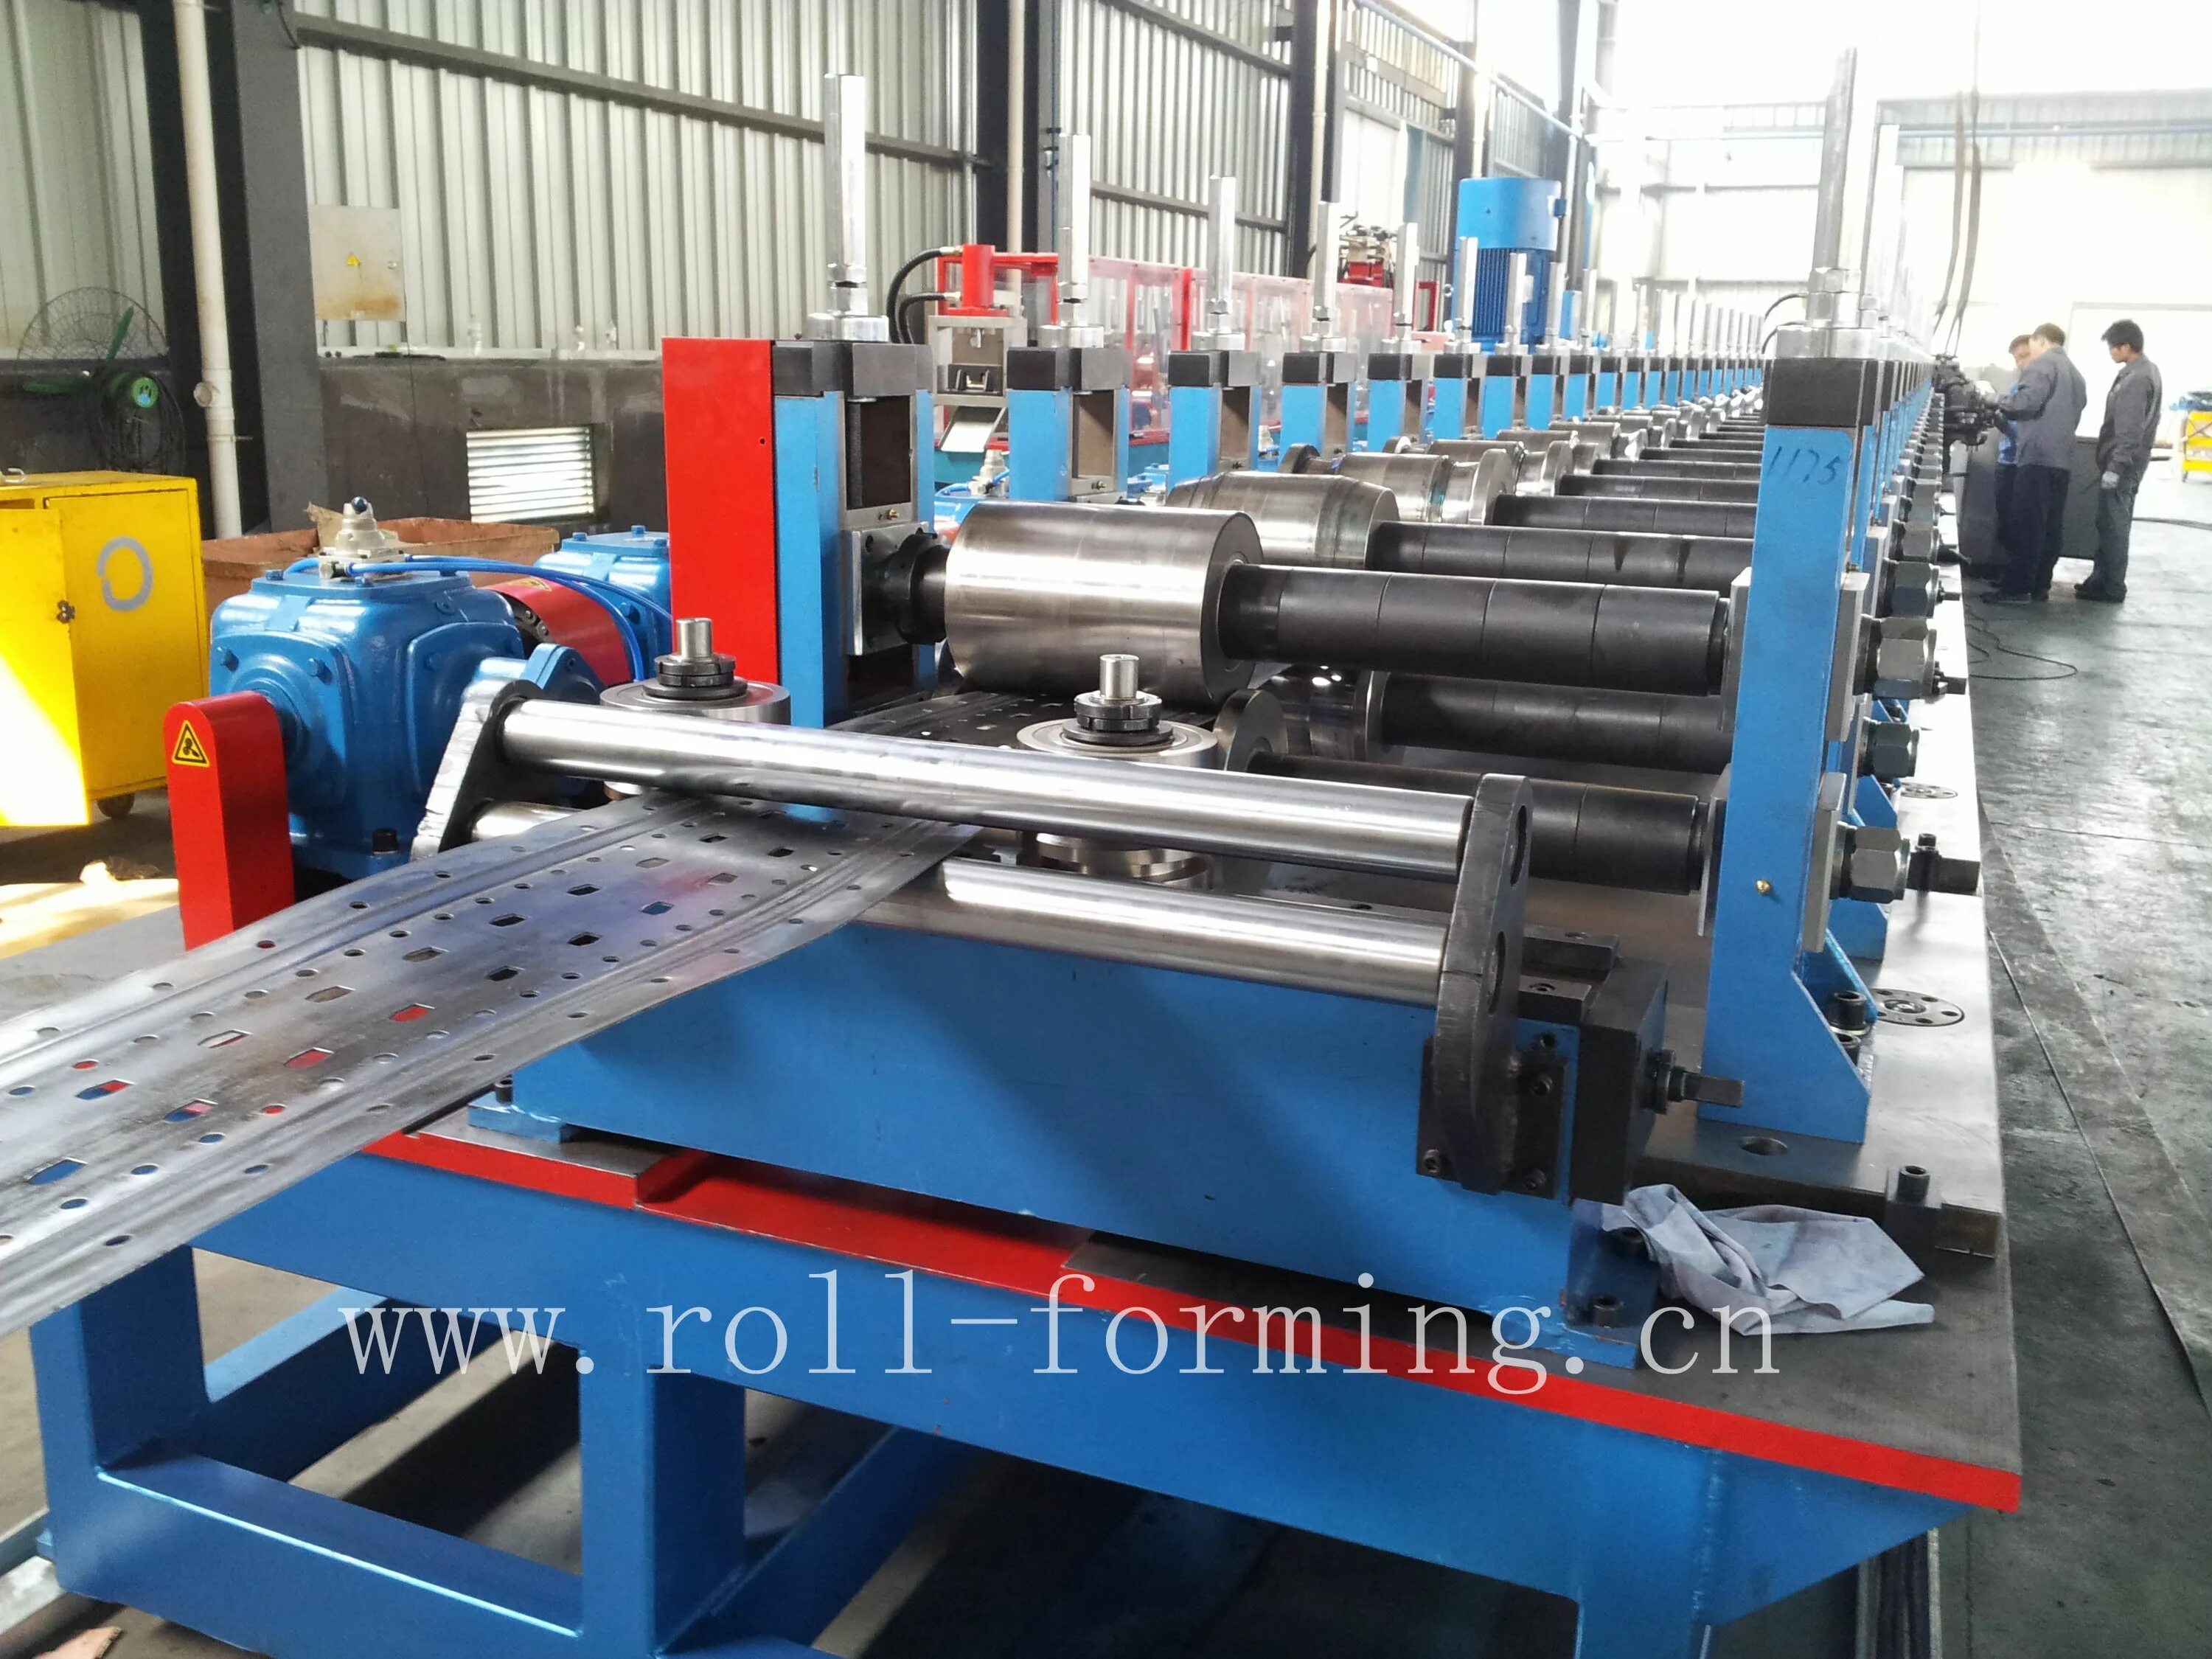 Roll forming. Sheet Metal Roll forming. Formed Steel Rollers. Professional Manufacturer for Roll forming Equipment c8 c 21.